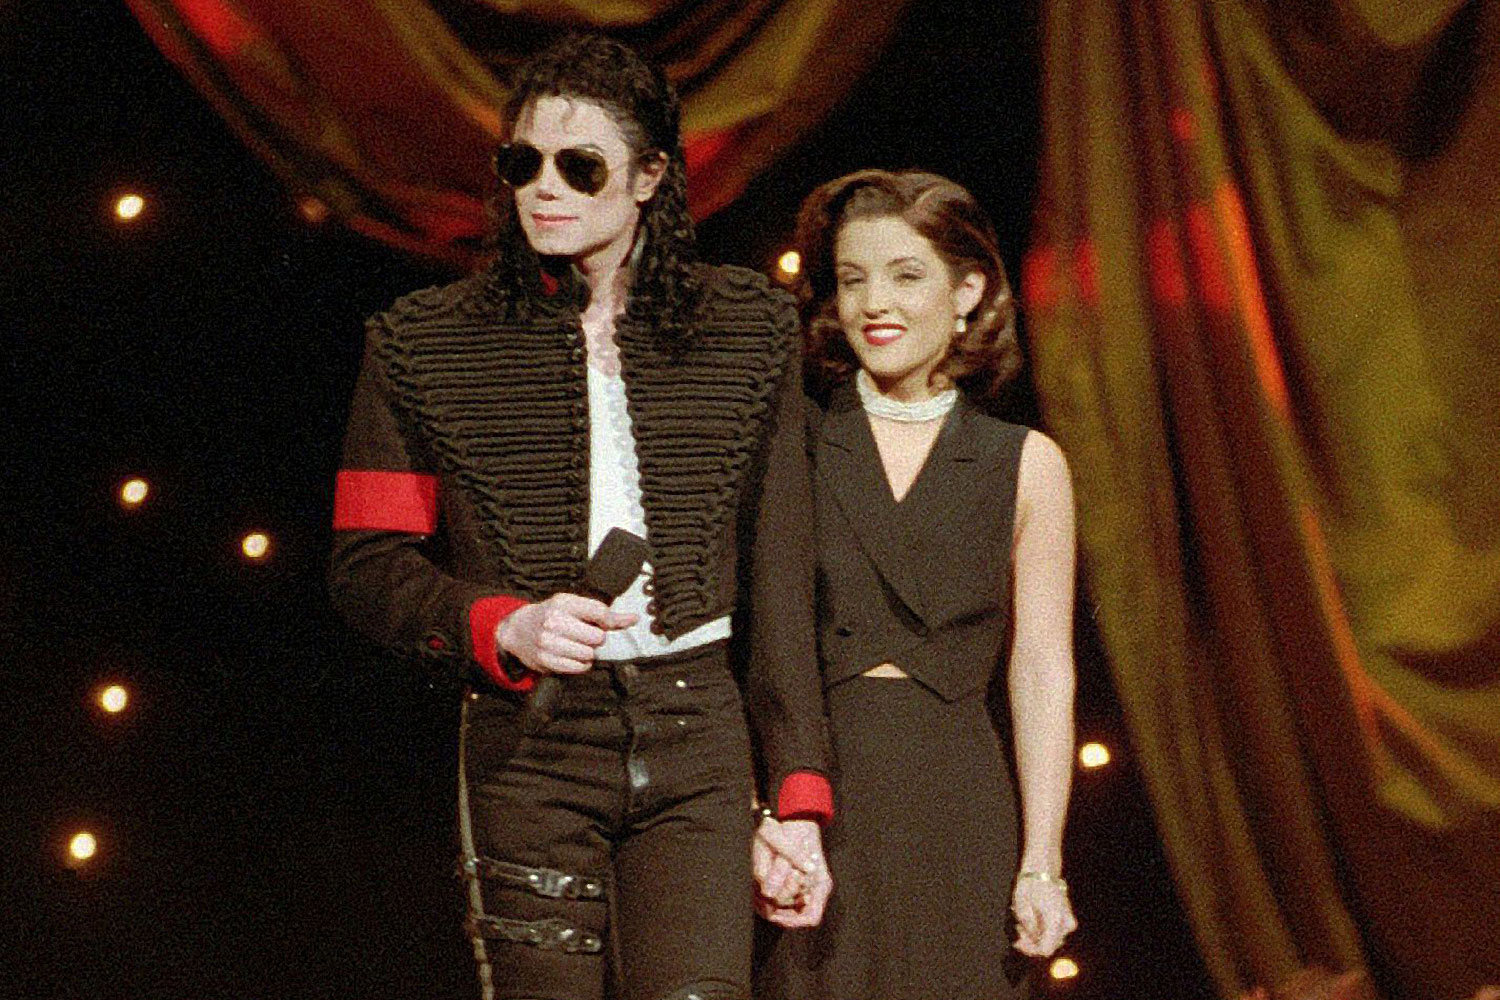 Lisa Marie with Michael Jackson at the 1994 MTV Video Music Awards